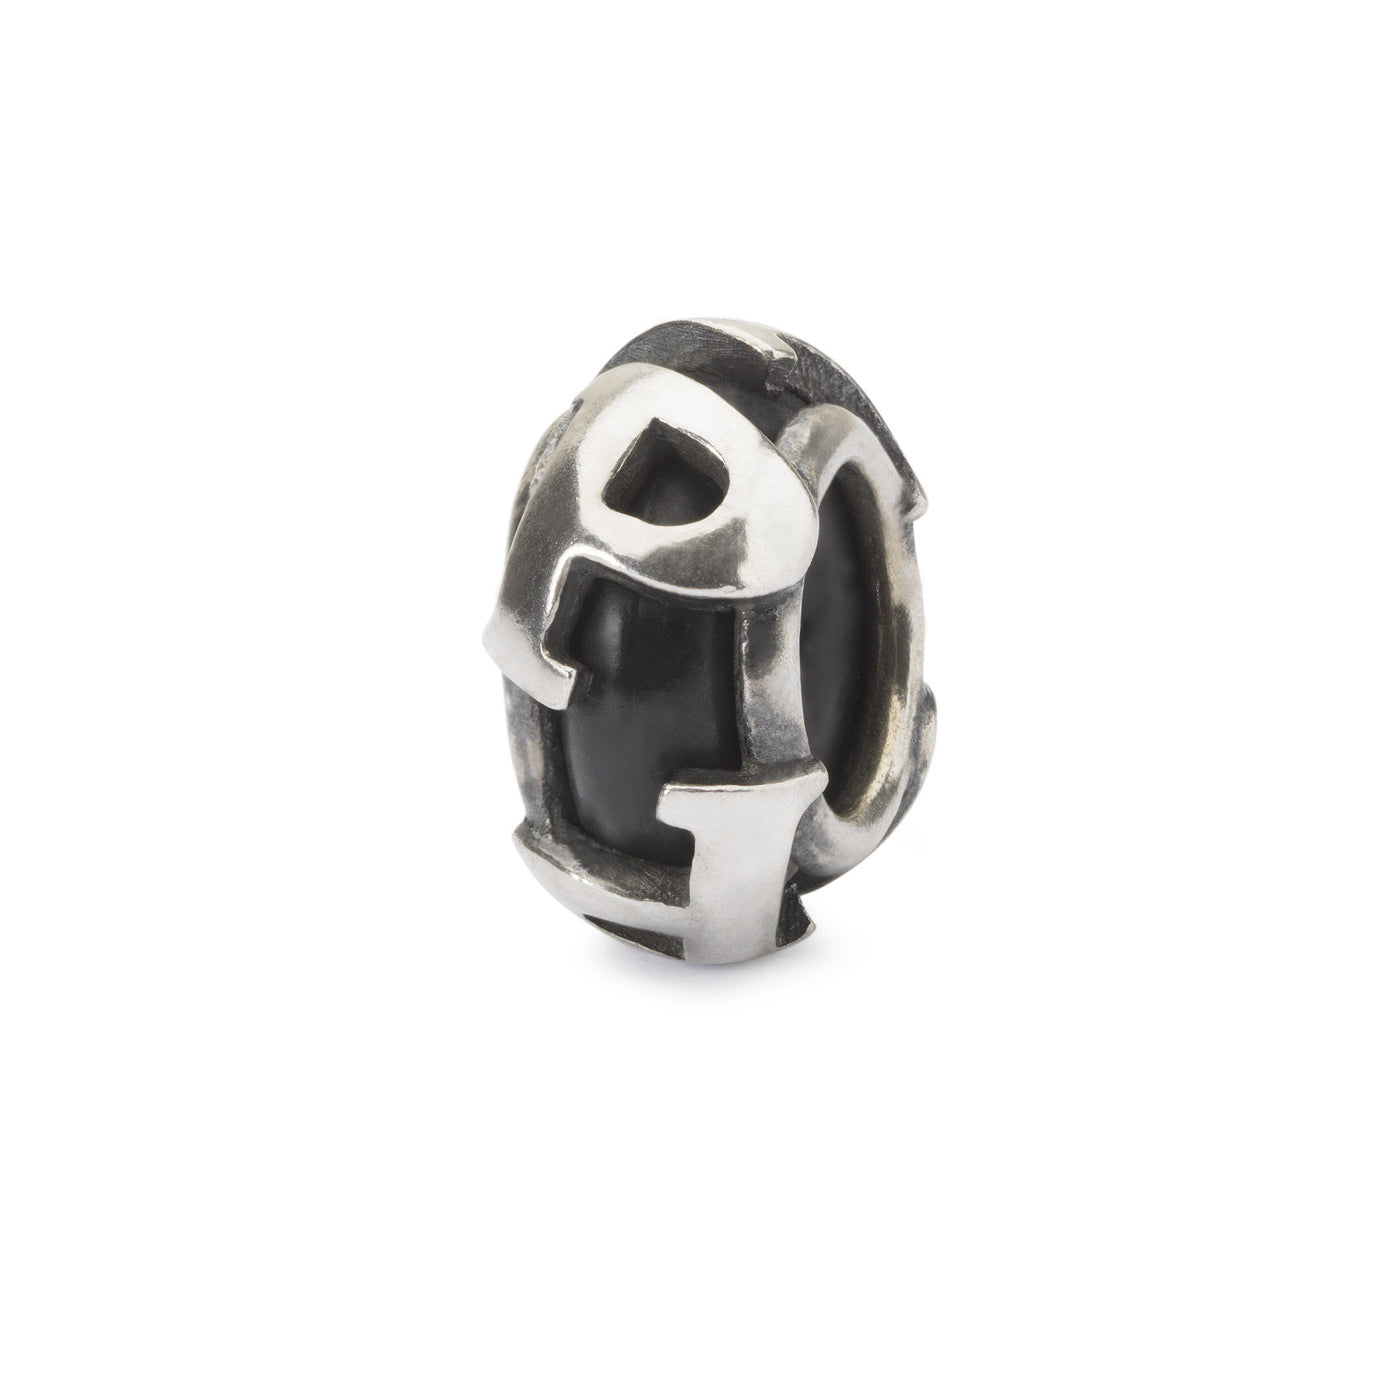 P Spacer - Trollbeads Canada